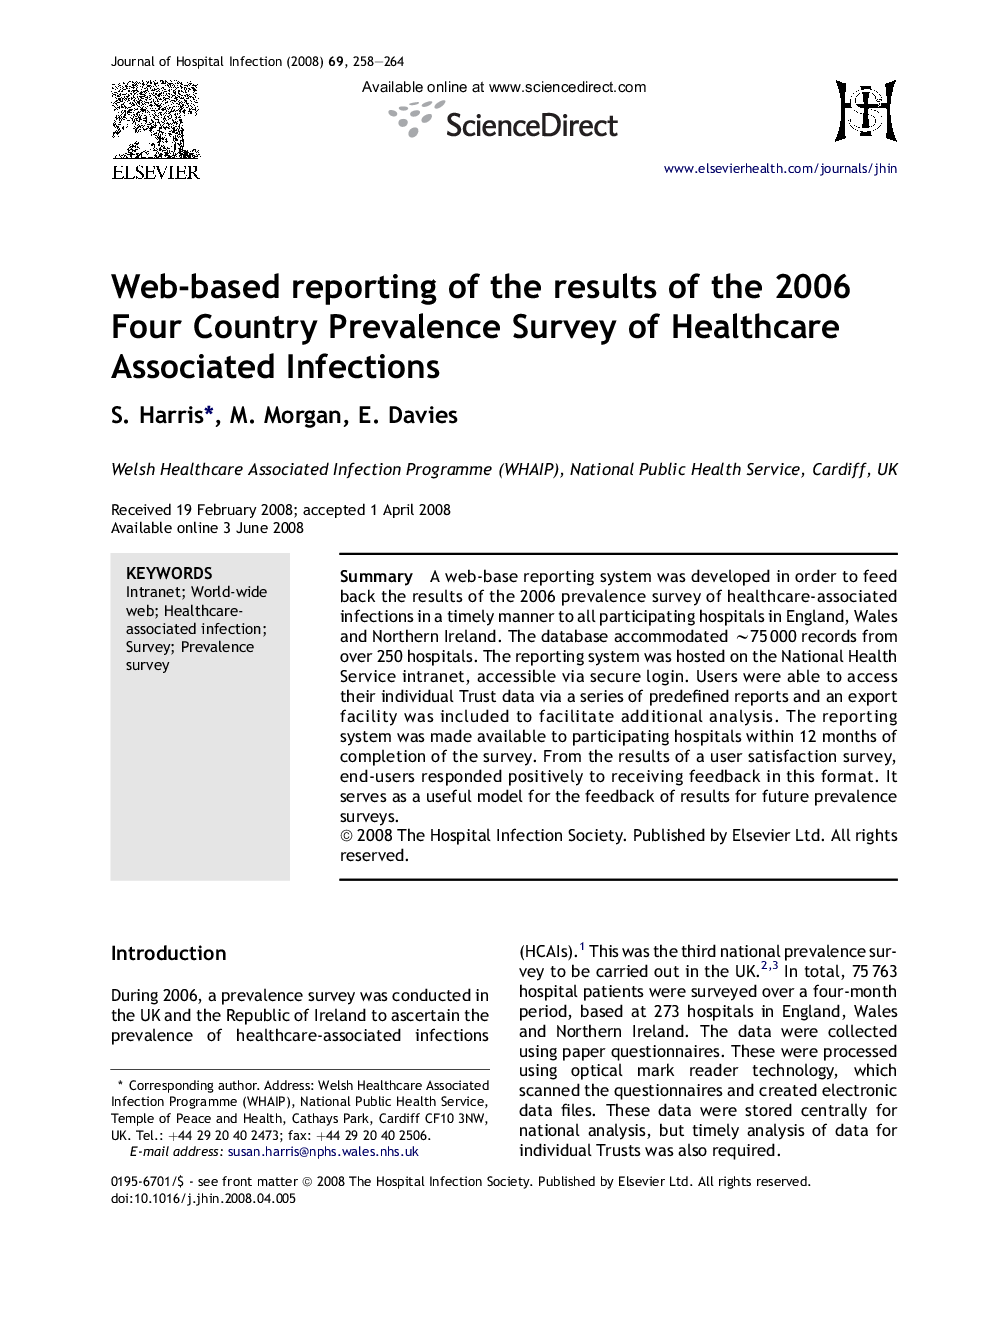 Web-based reporting of the results of the 2006 Four Country Prevalence Survey of Healthcare Associated Infections